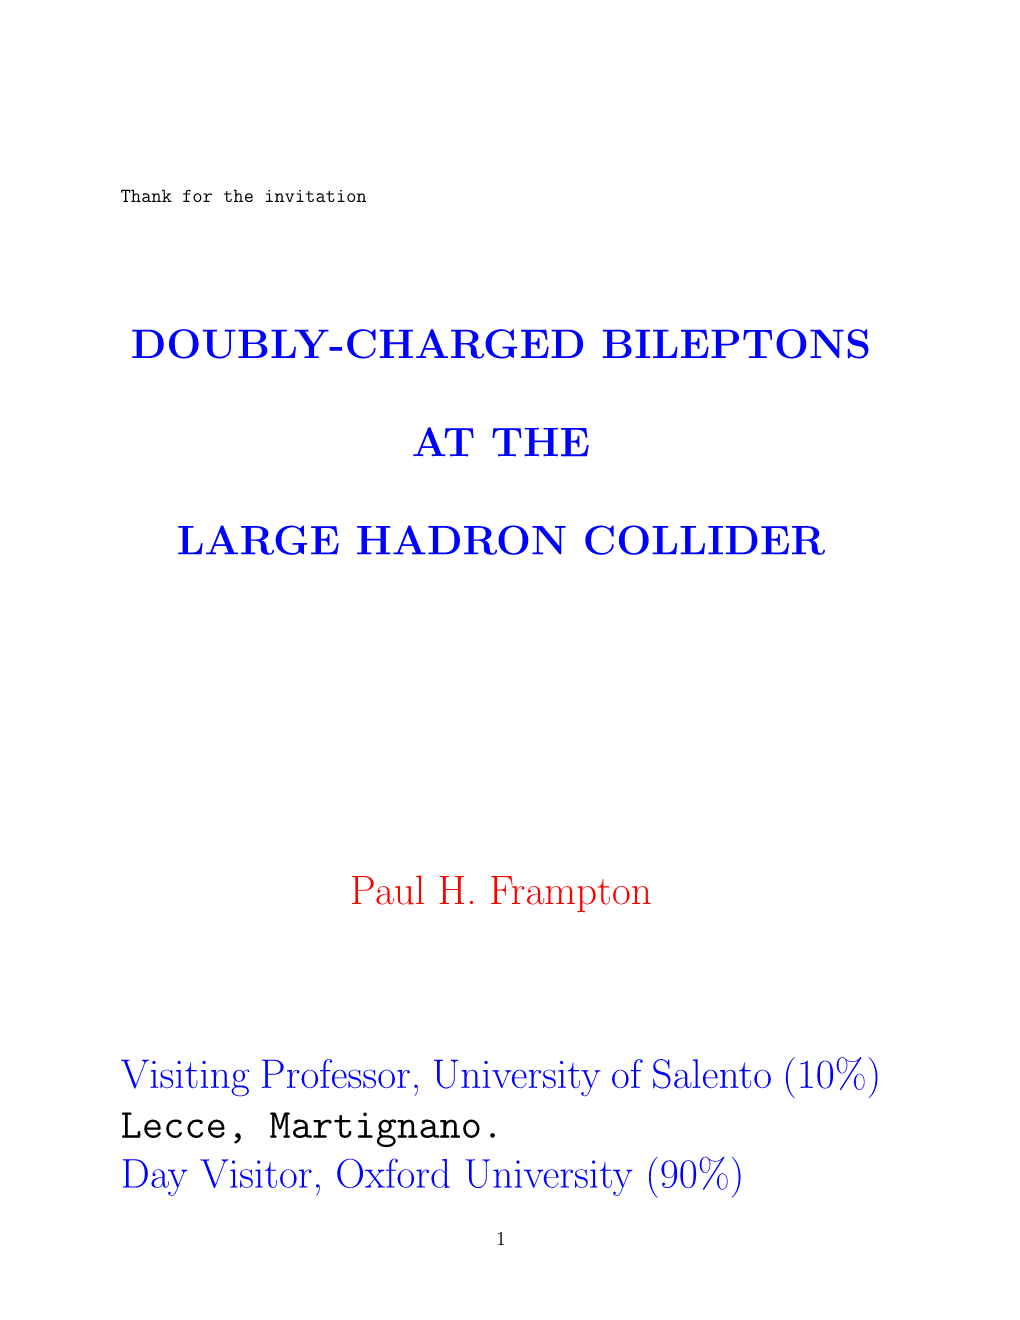 DOUBLY-CHARGED BILEPTONS at the LARGE HADRON COLLIDER Paul H. Frampton Visiting Professor, University of Salento